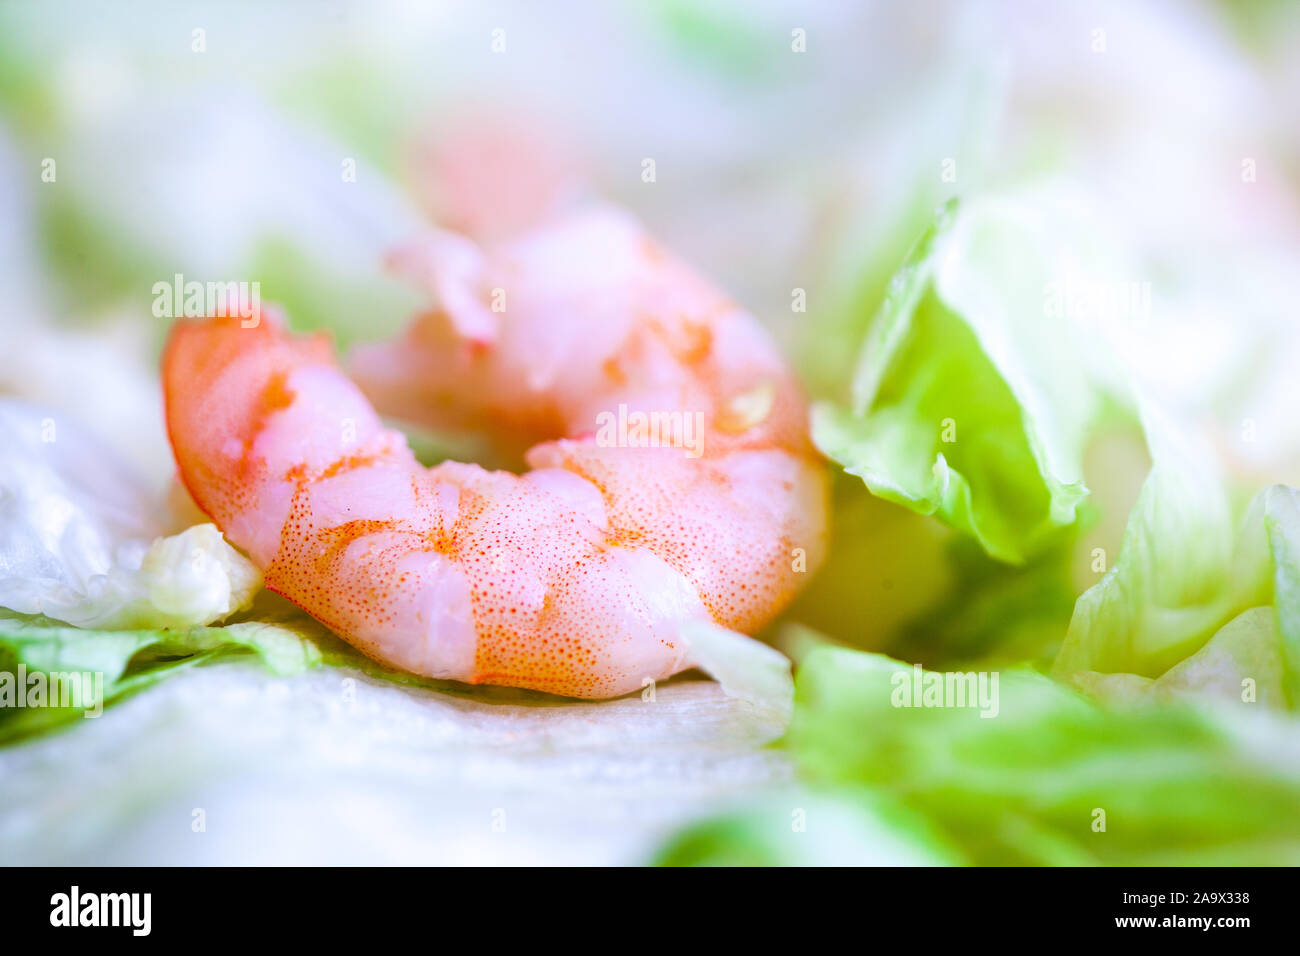 Delicious caesar with argentinian shrimps closeup. North american cuisine restaurant dish, menu item. Tasty salad with natural seafood. Organic lunch, Stock Photo